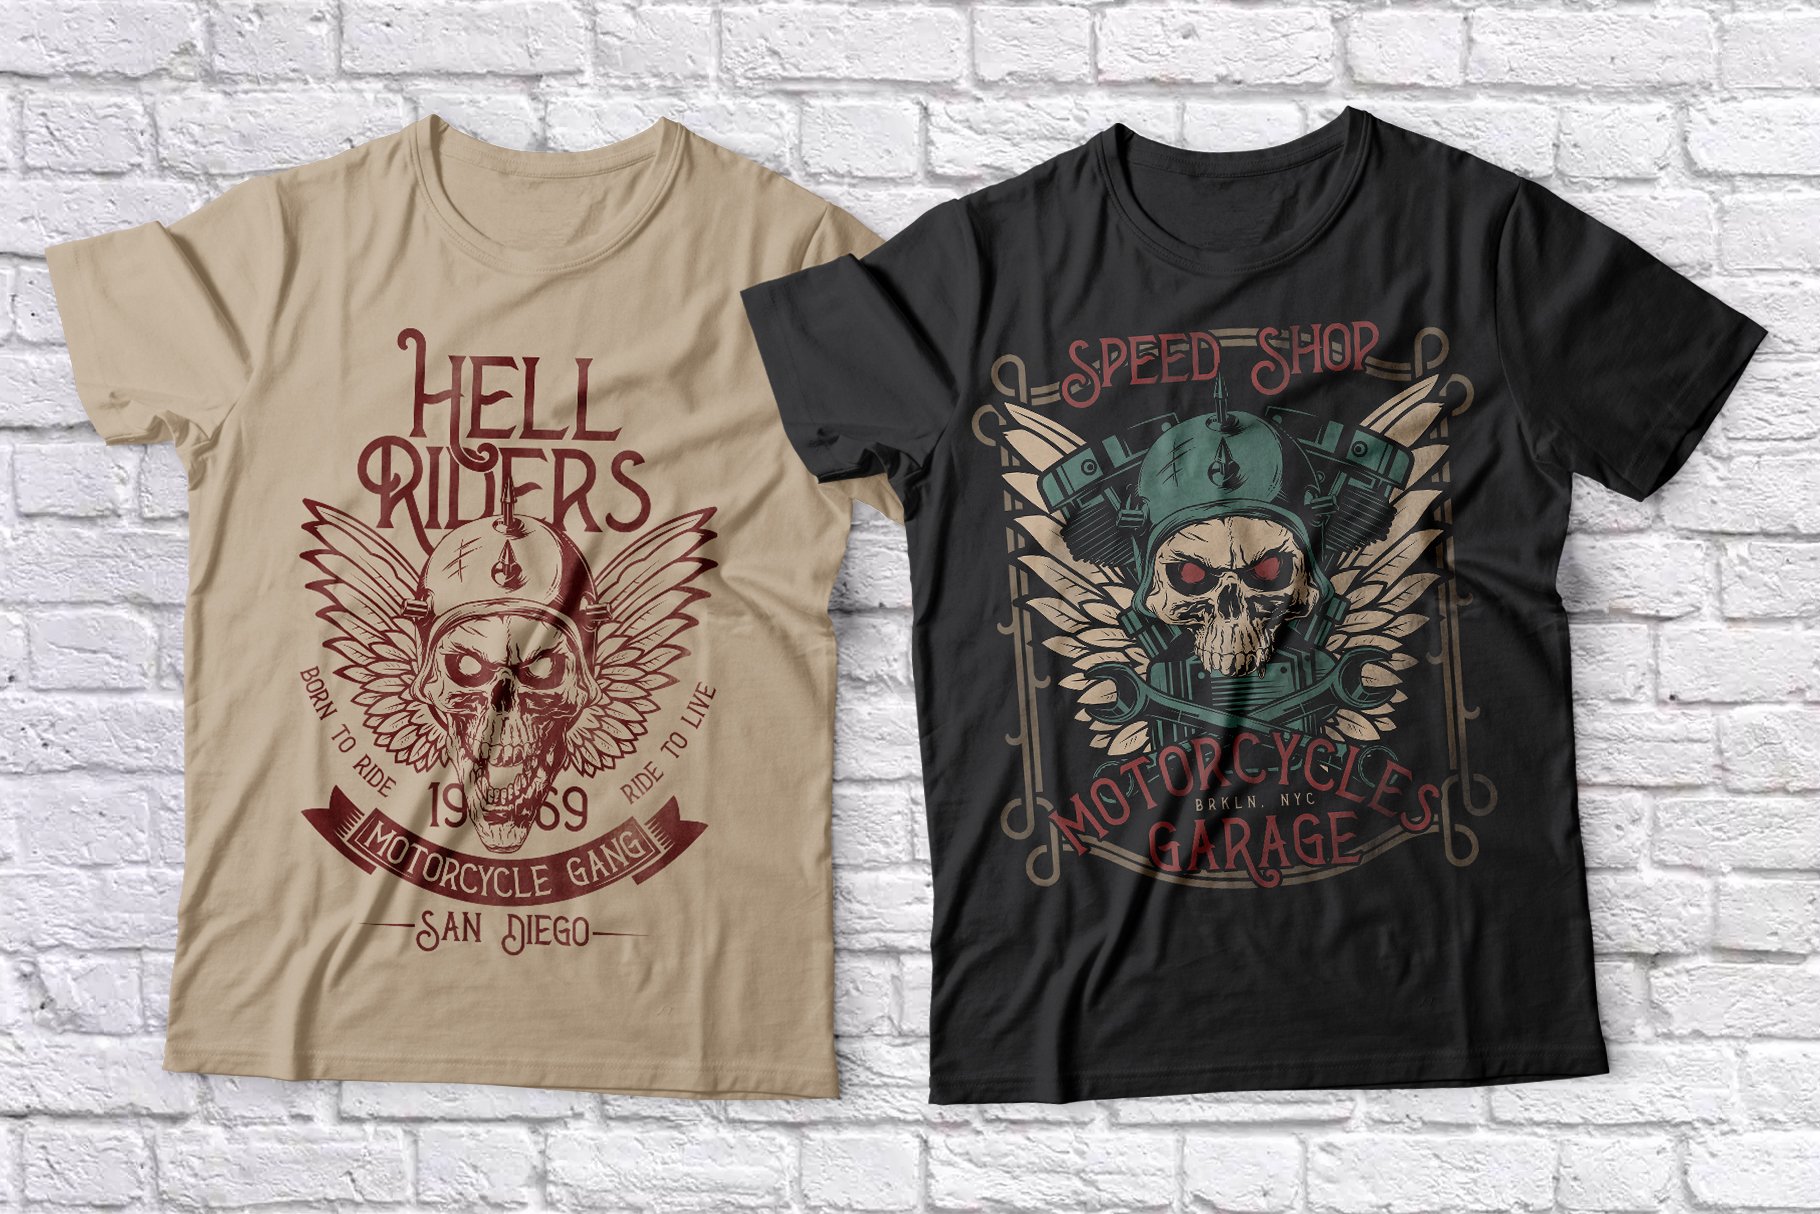 T-shirts with motorcycle skulls.